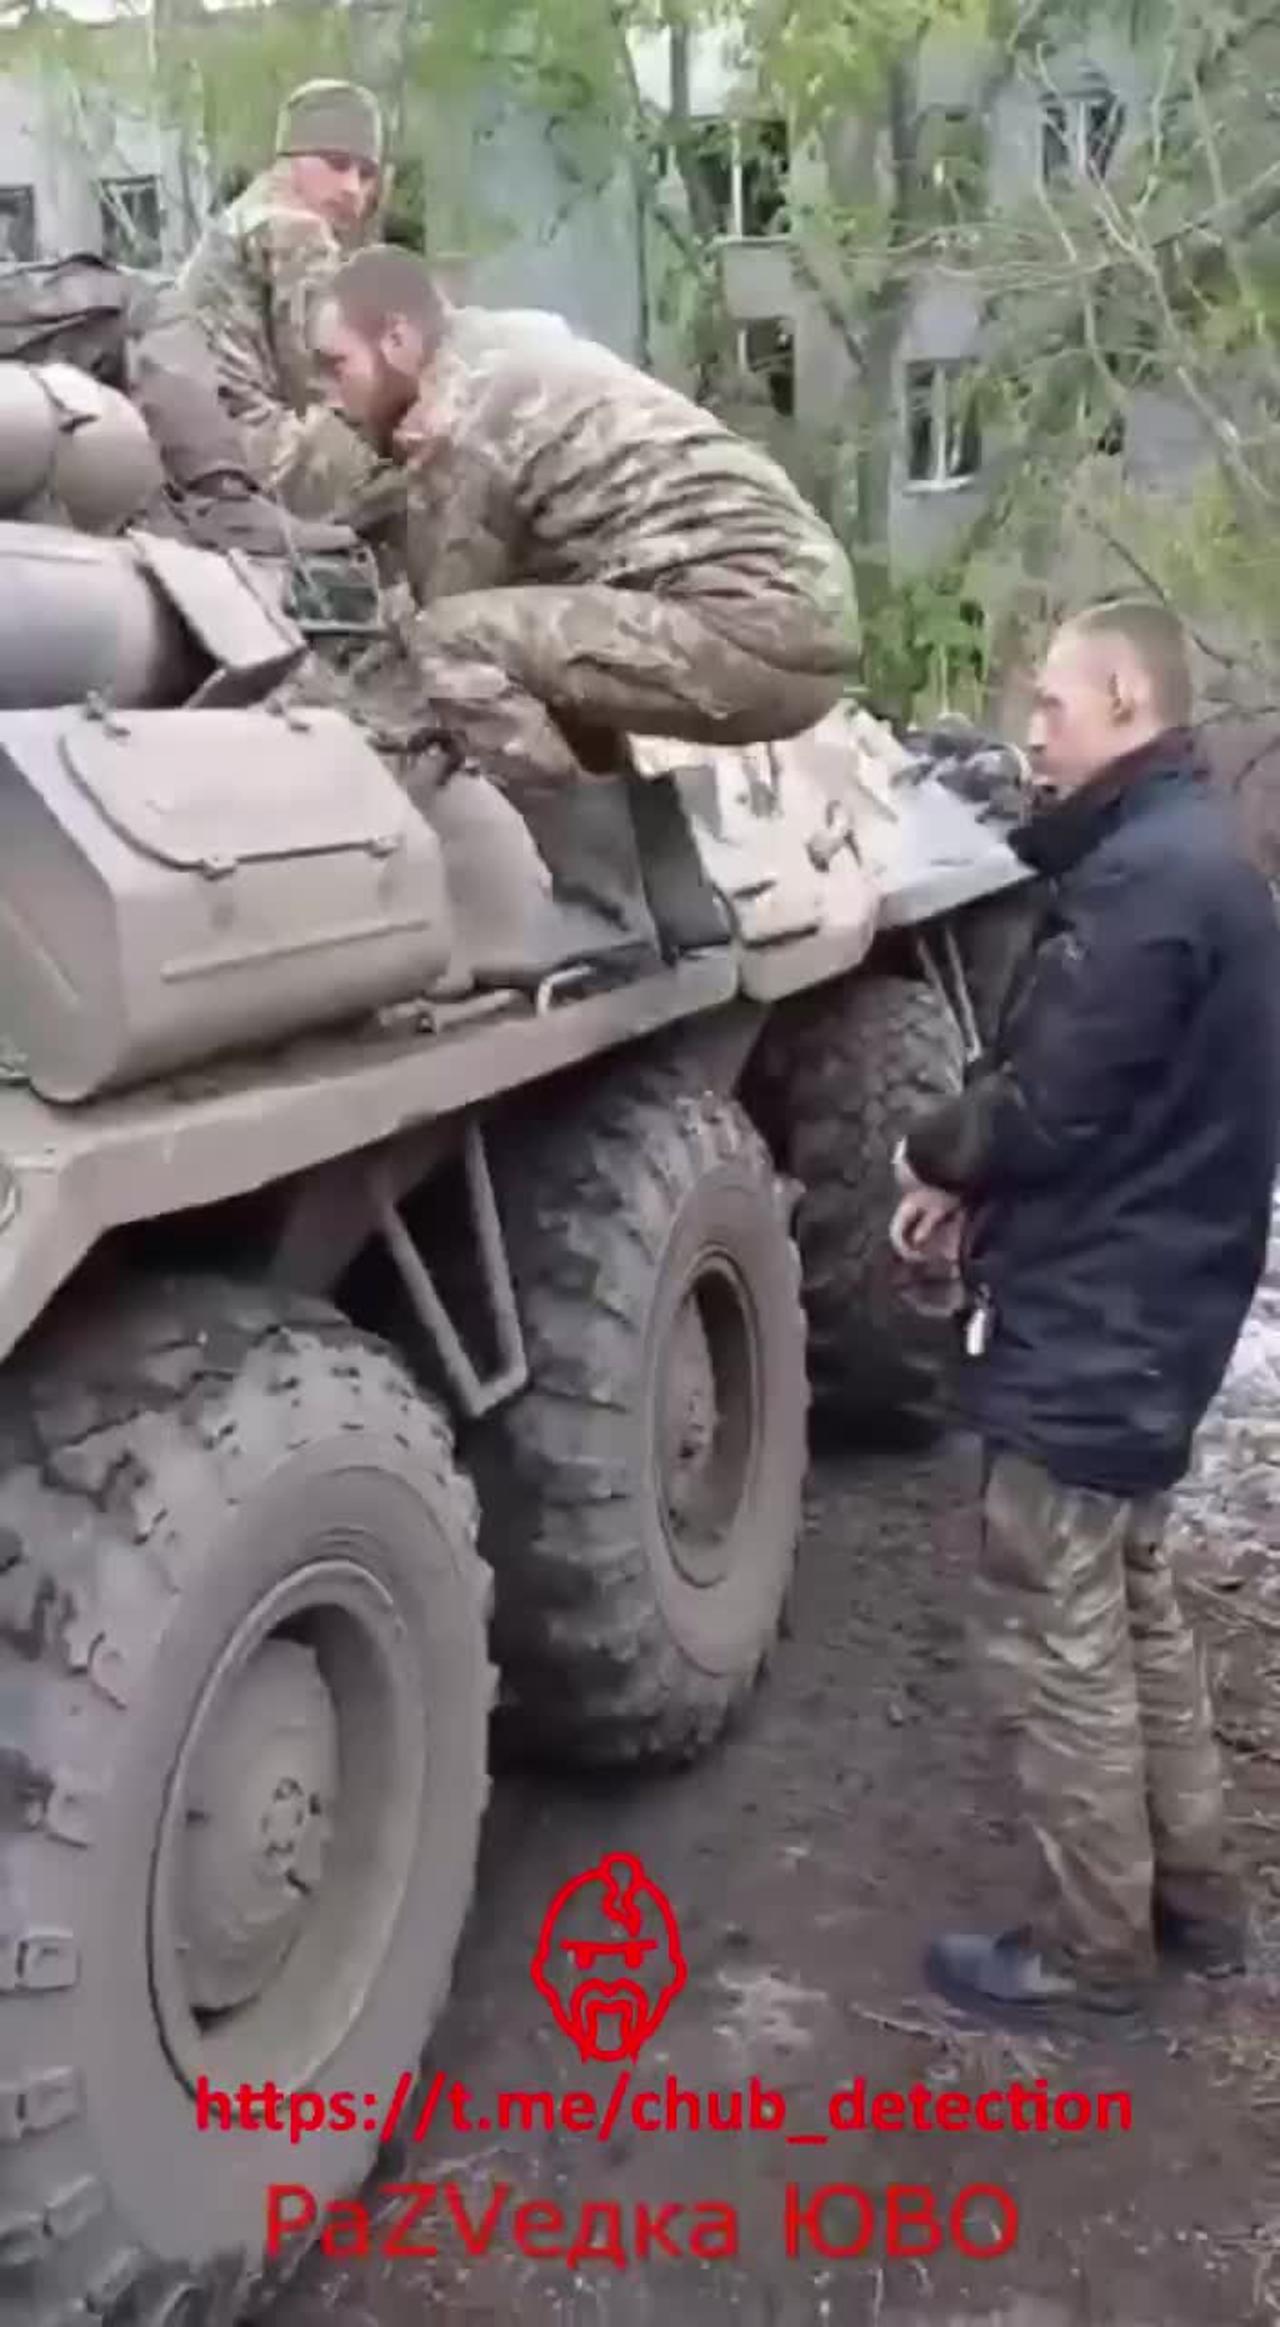 Ukraine War - More captured from the armed forces of Ukraine